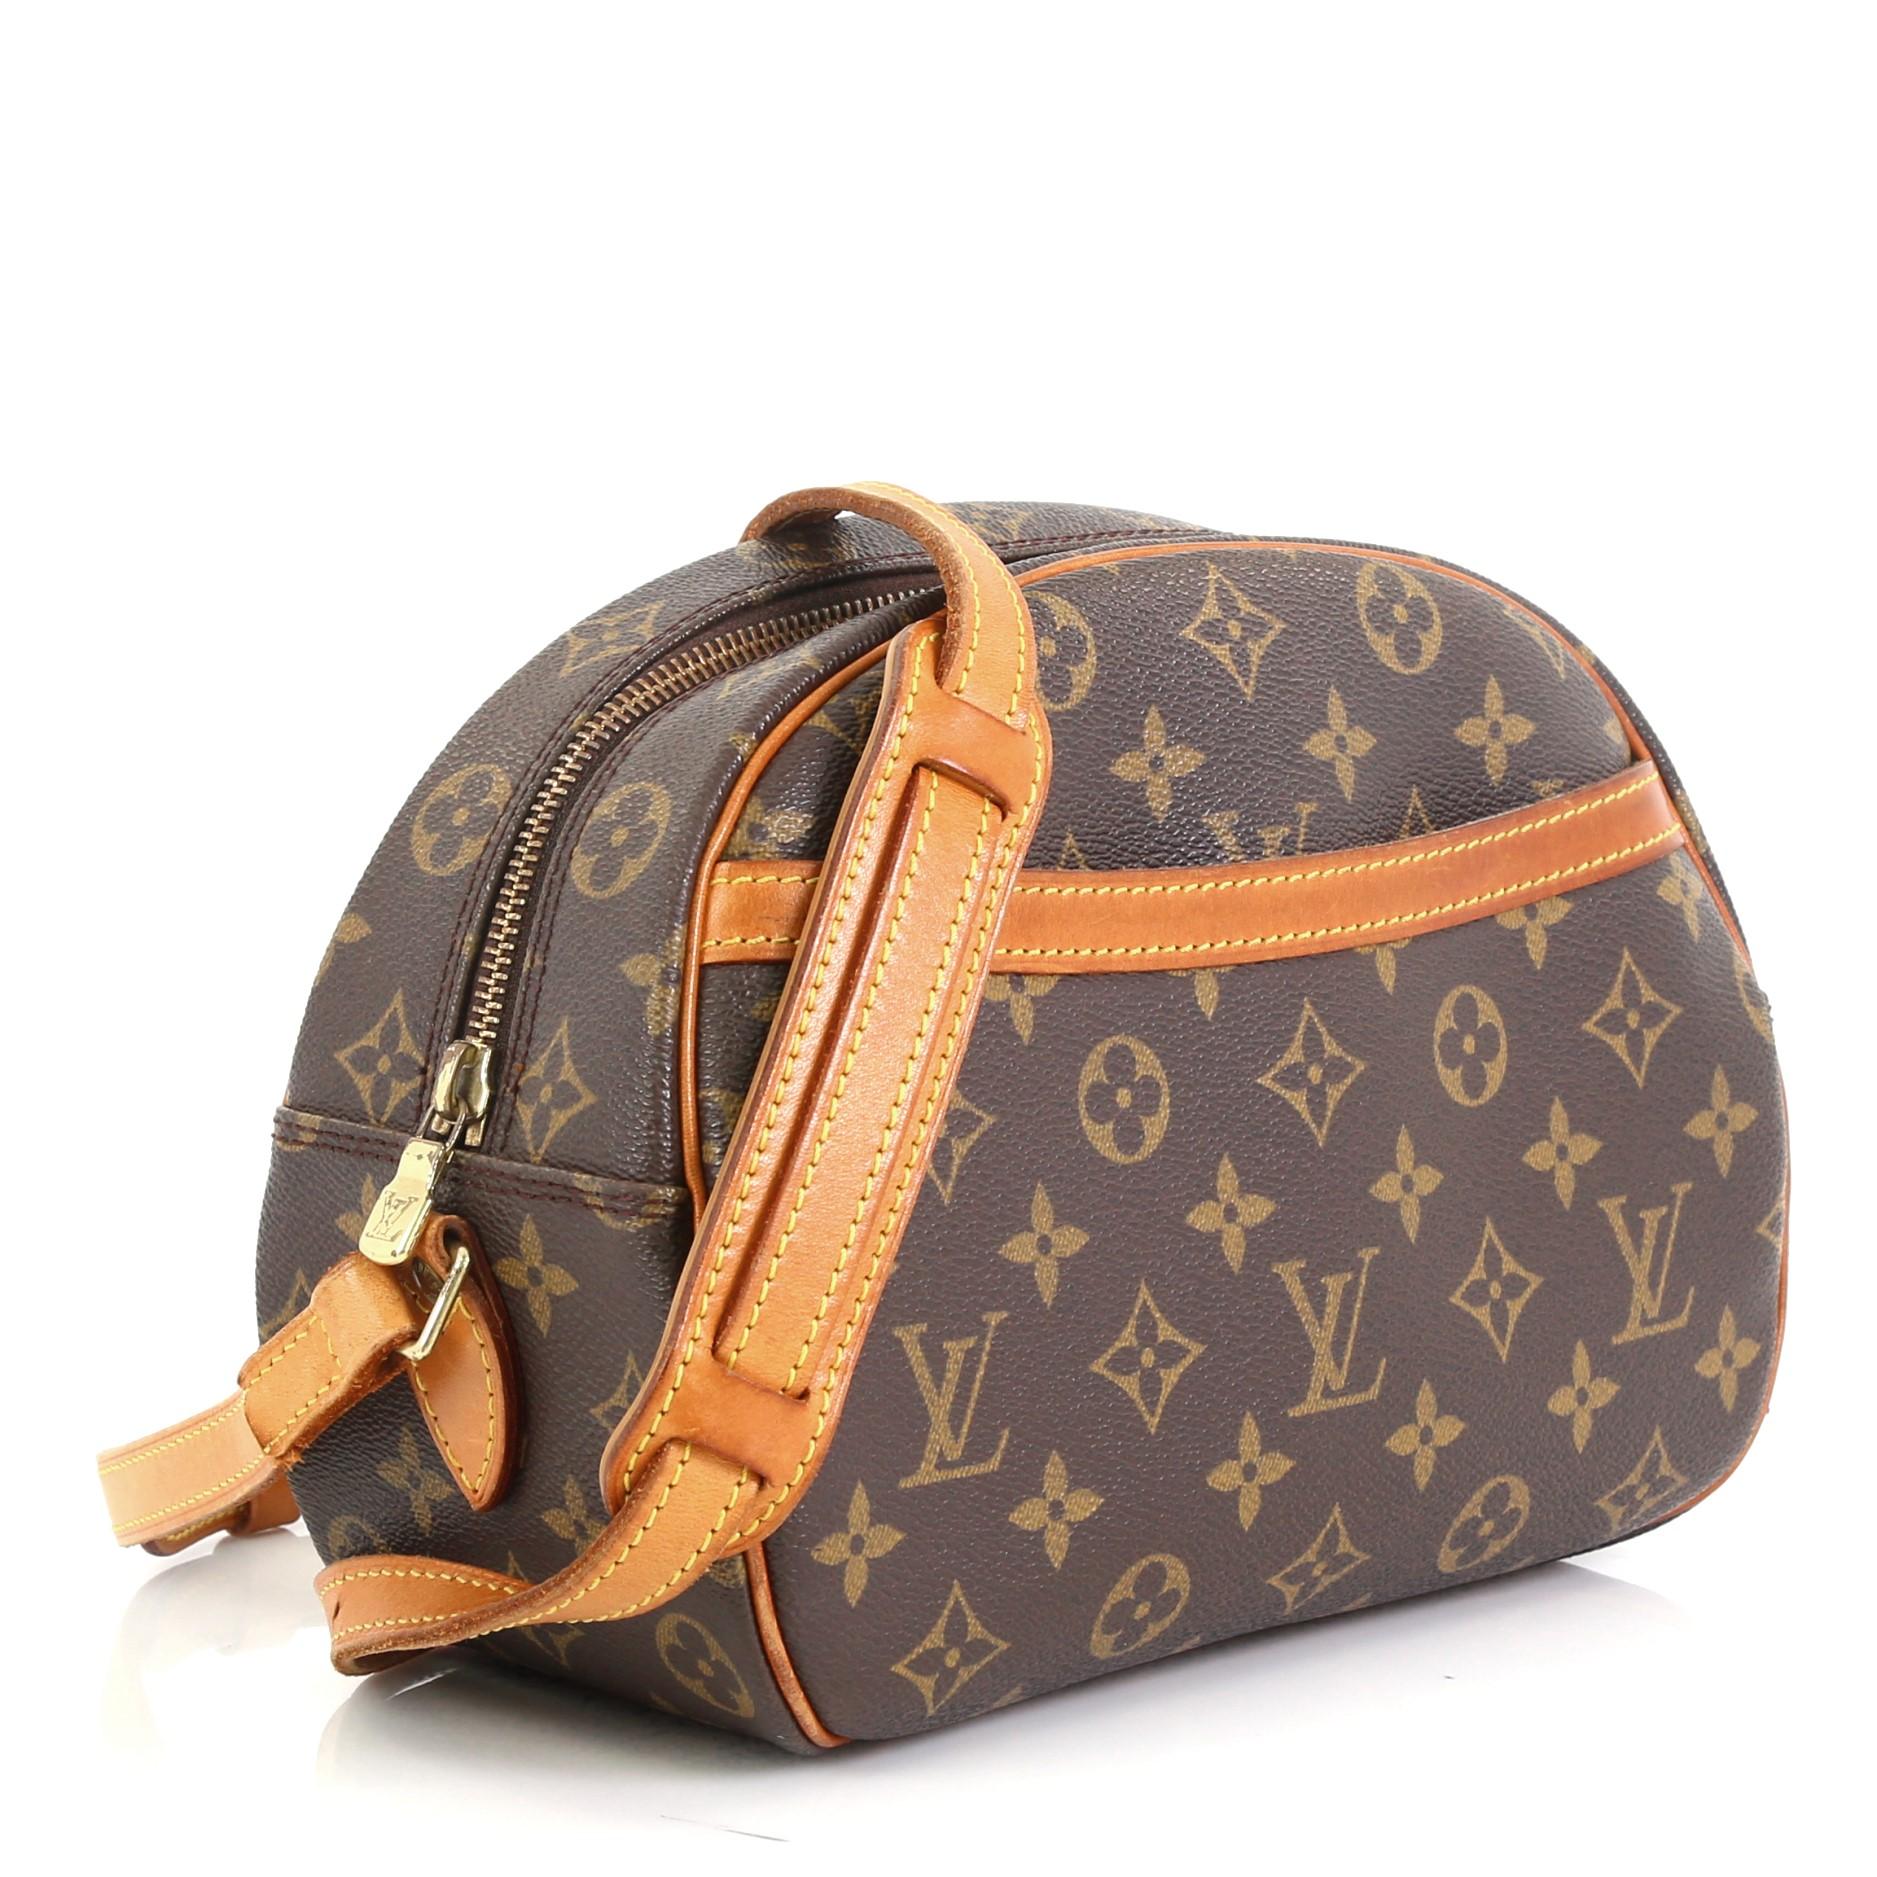 This Louis Vuitton Blois Handbag Monogram Canvas, crafted from brown monogram coated canvas, features adjustable leather shoulder strap, exterior front pocket, vachetta leather trim, and gold-tone hardware. Its zip closure opens to a brown leather